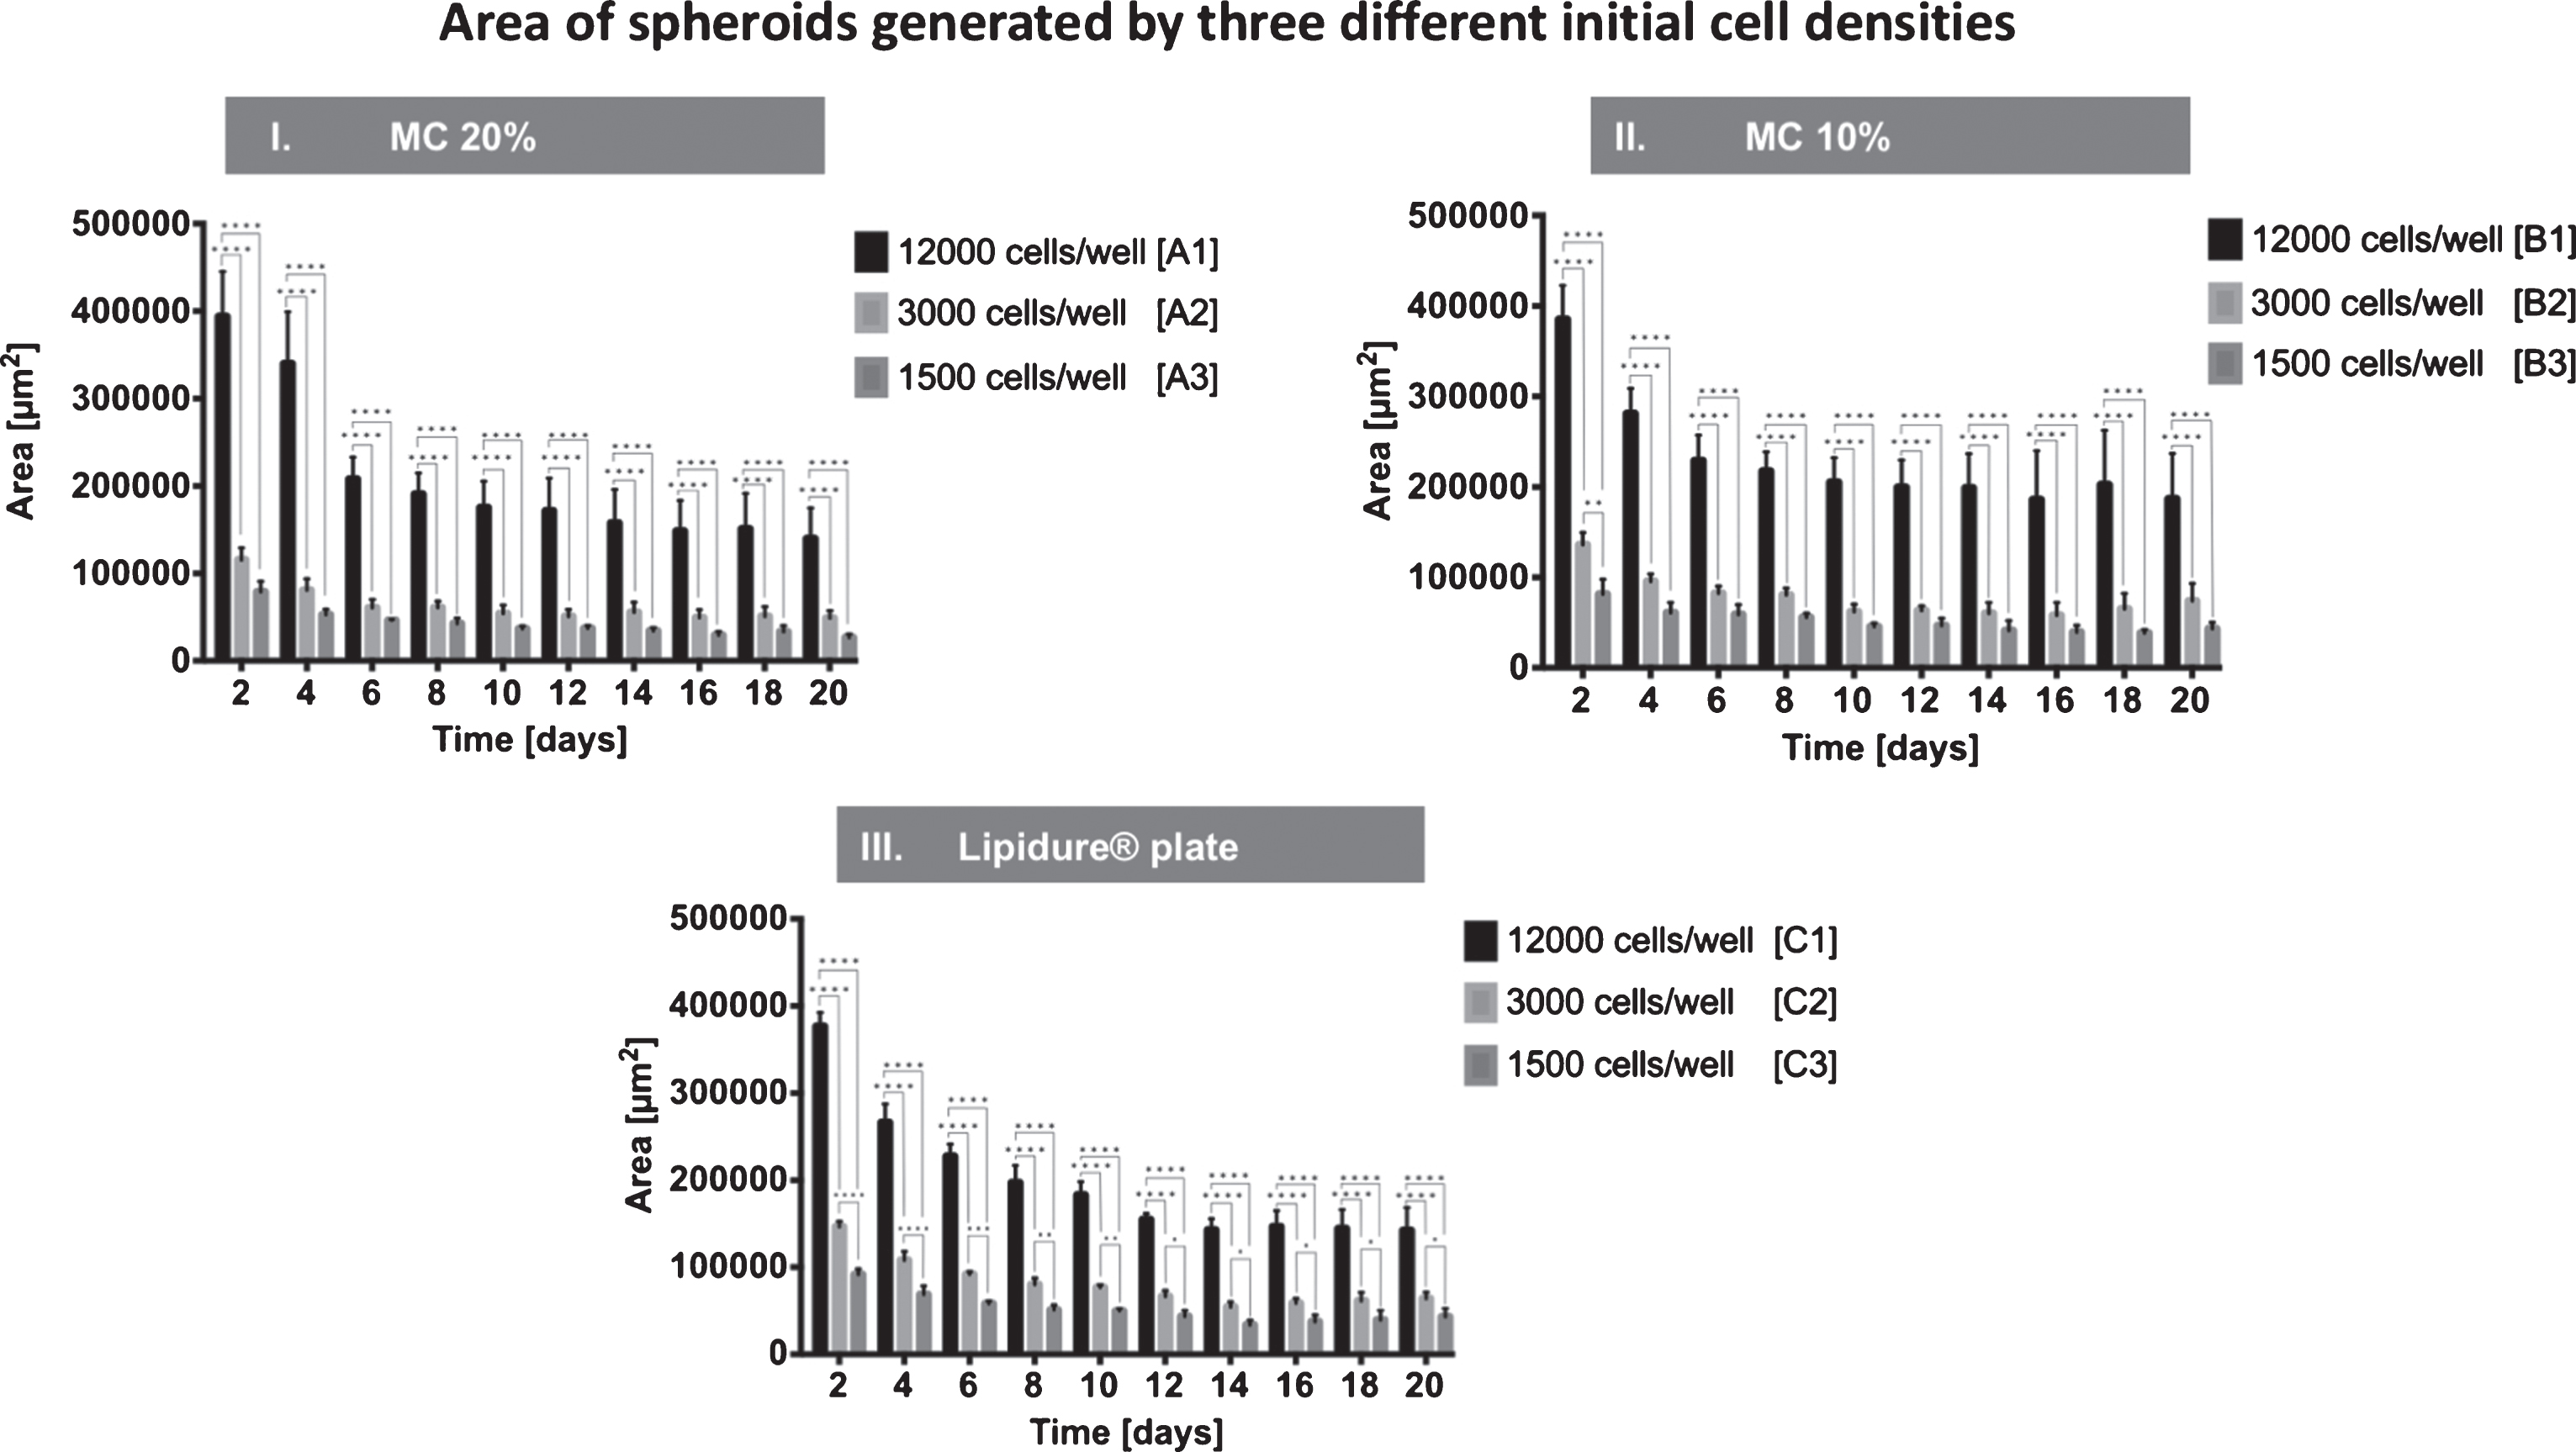 Effect of seeding density on spheroid generation. Spheroids were generated with three different methods and three different initial cell seeding densities: I. methylcellulose 20%, II. methylcellulose 10% and III. Lipidure® plate either with an initial cell density of 12,000 cells/well, 3,000 cells/well and 1,500 cells/well. Areas of spheroids were measured at days 2, 4, 6, 8, 10, 12, 14, 16, 18, and 20. All values are expressed as mean values±standard deviation.